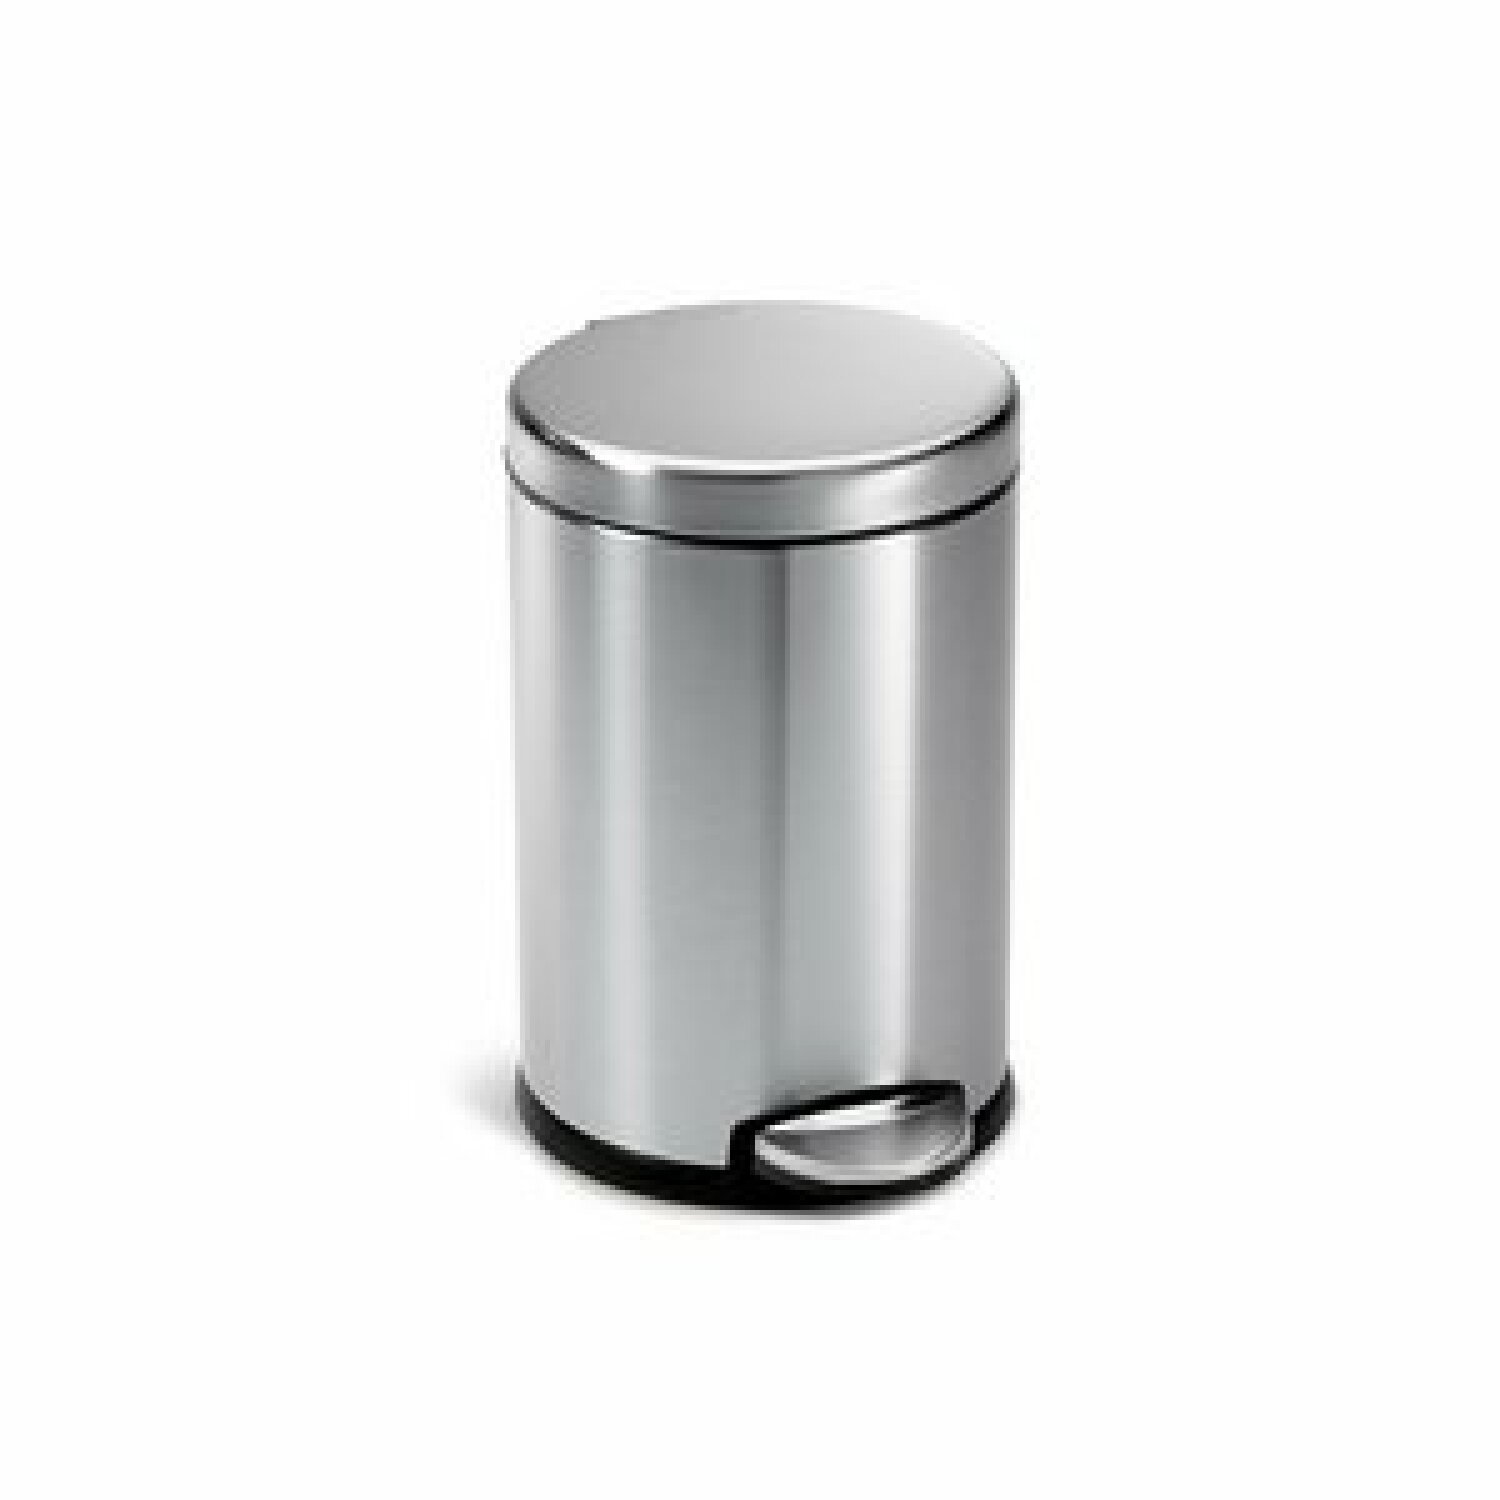 <a href="https://amzn.to/2Ce1Isu" target="_blank" rel="noopener nofollow">Stainless trash can</a>